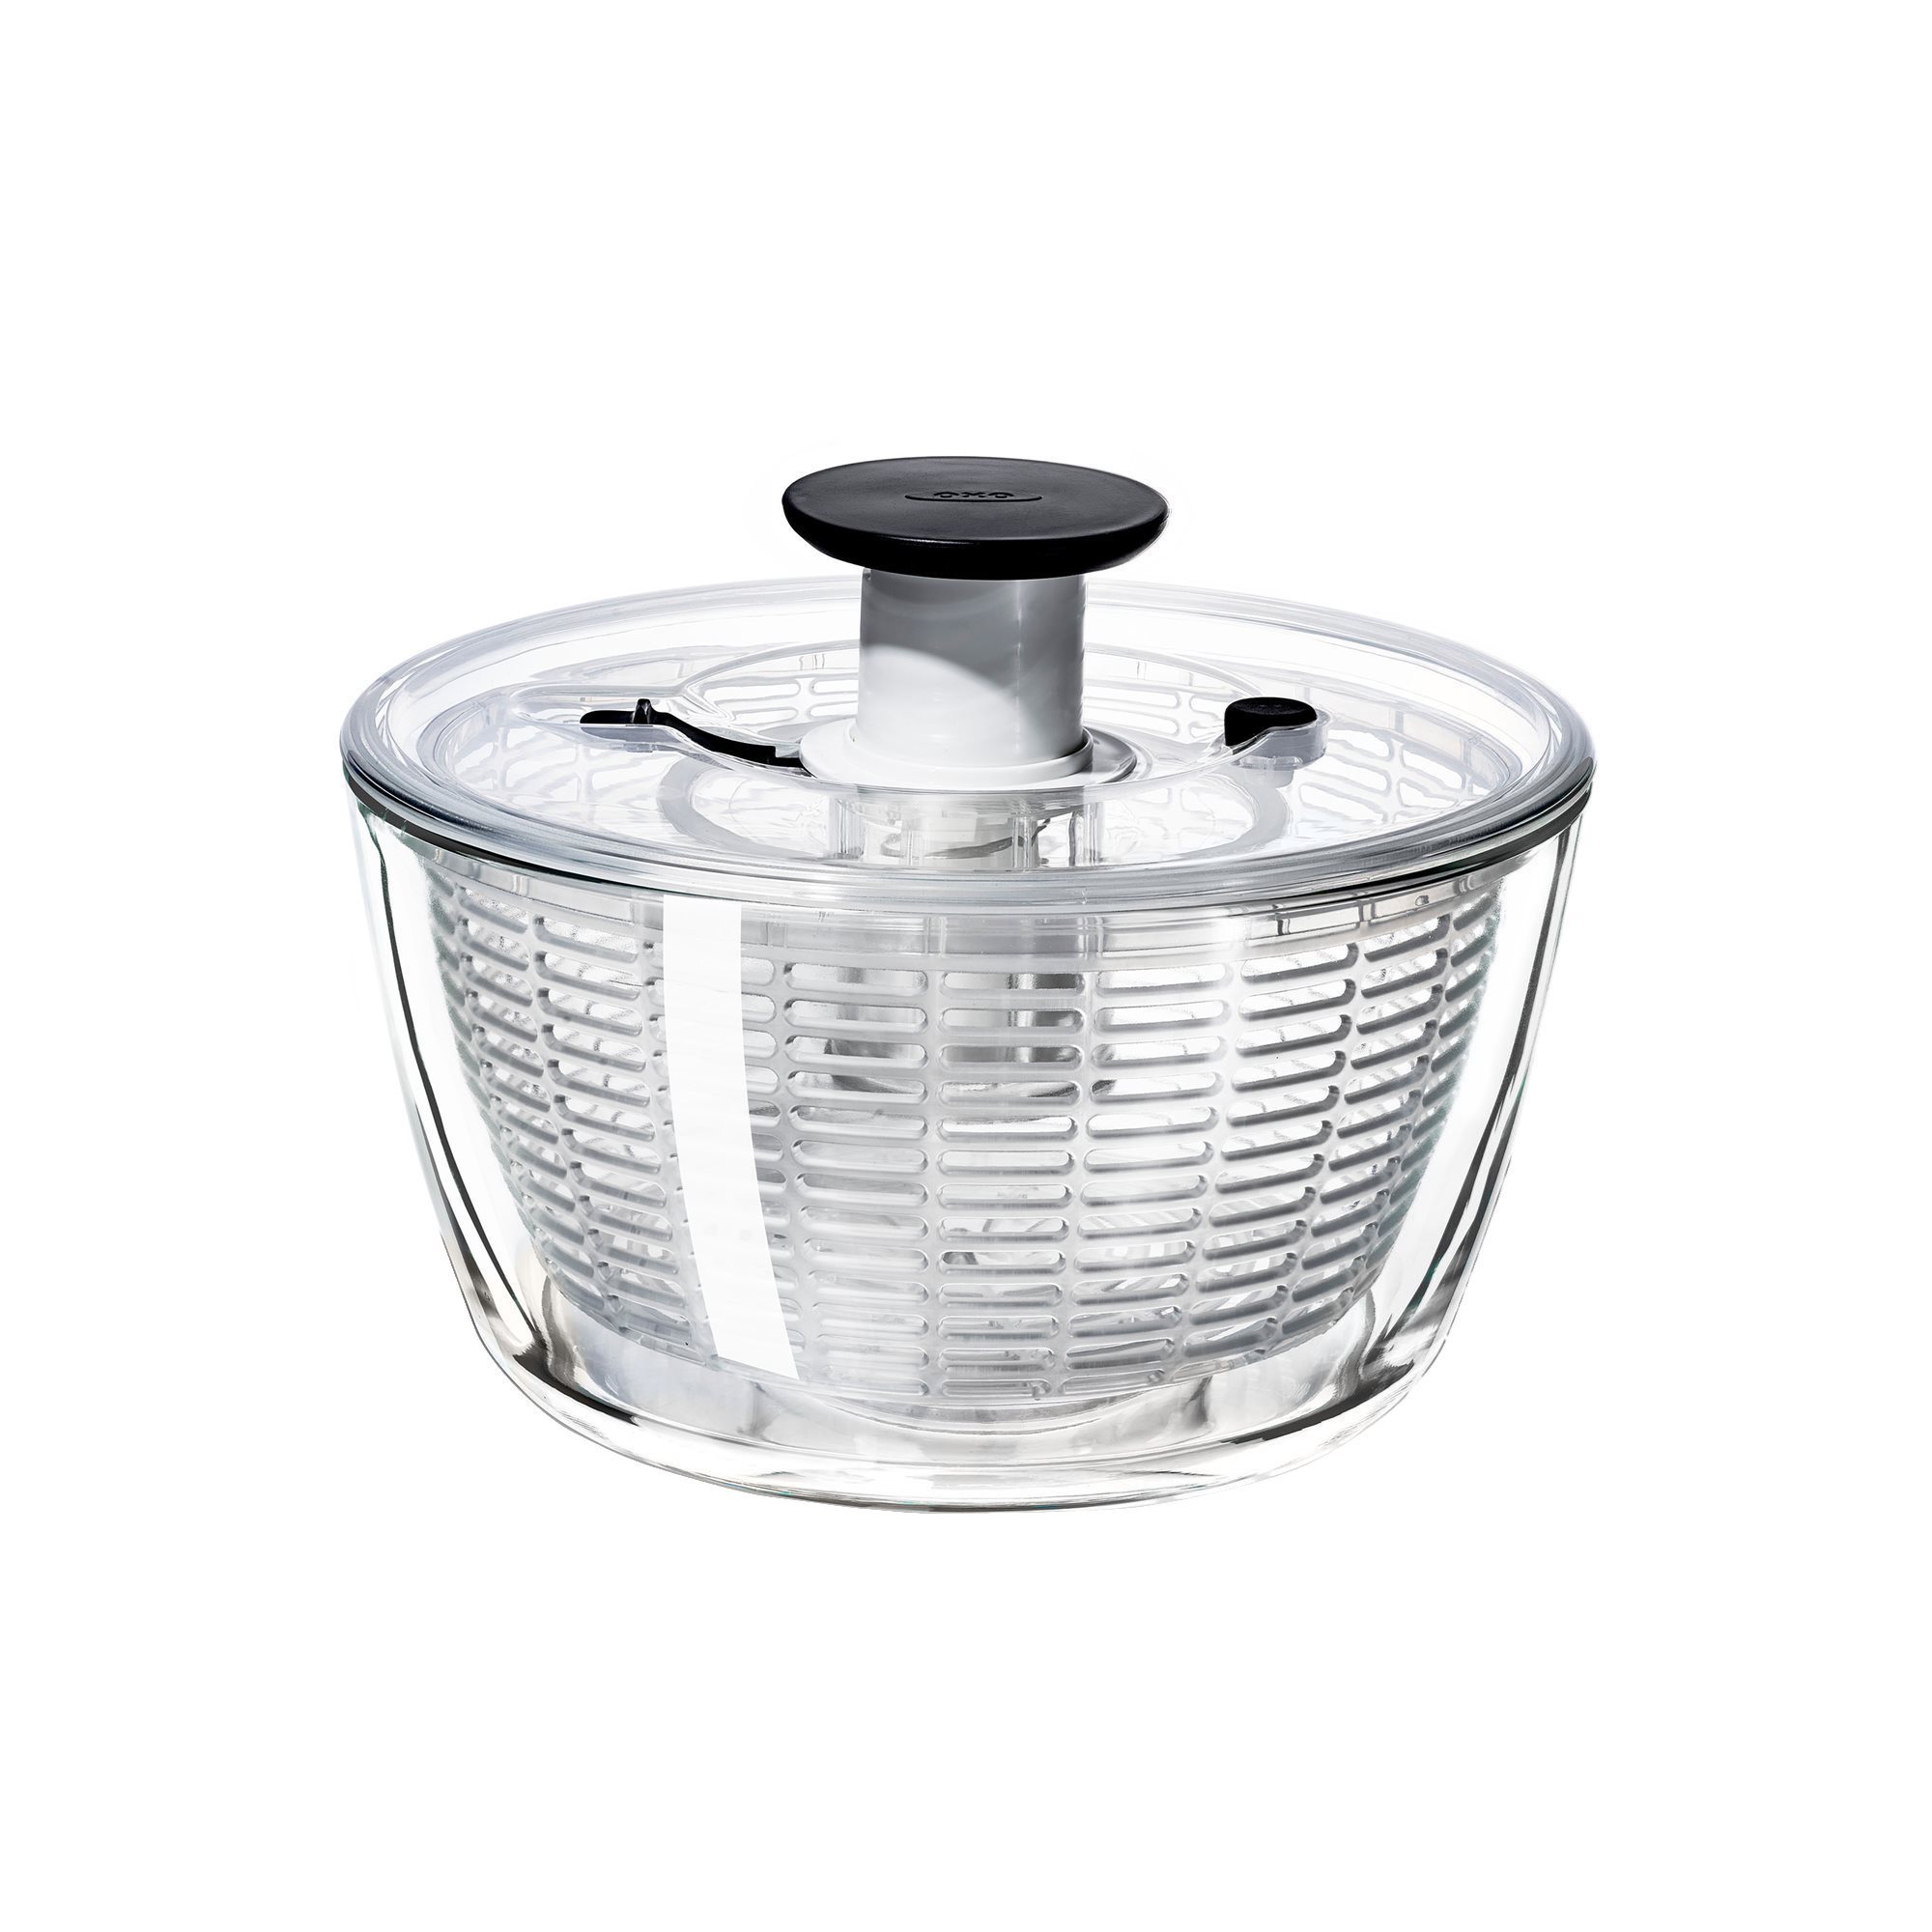 OXO Small Salad Spinner - Whisk